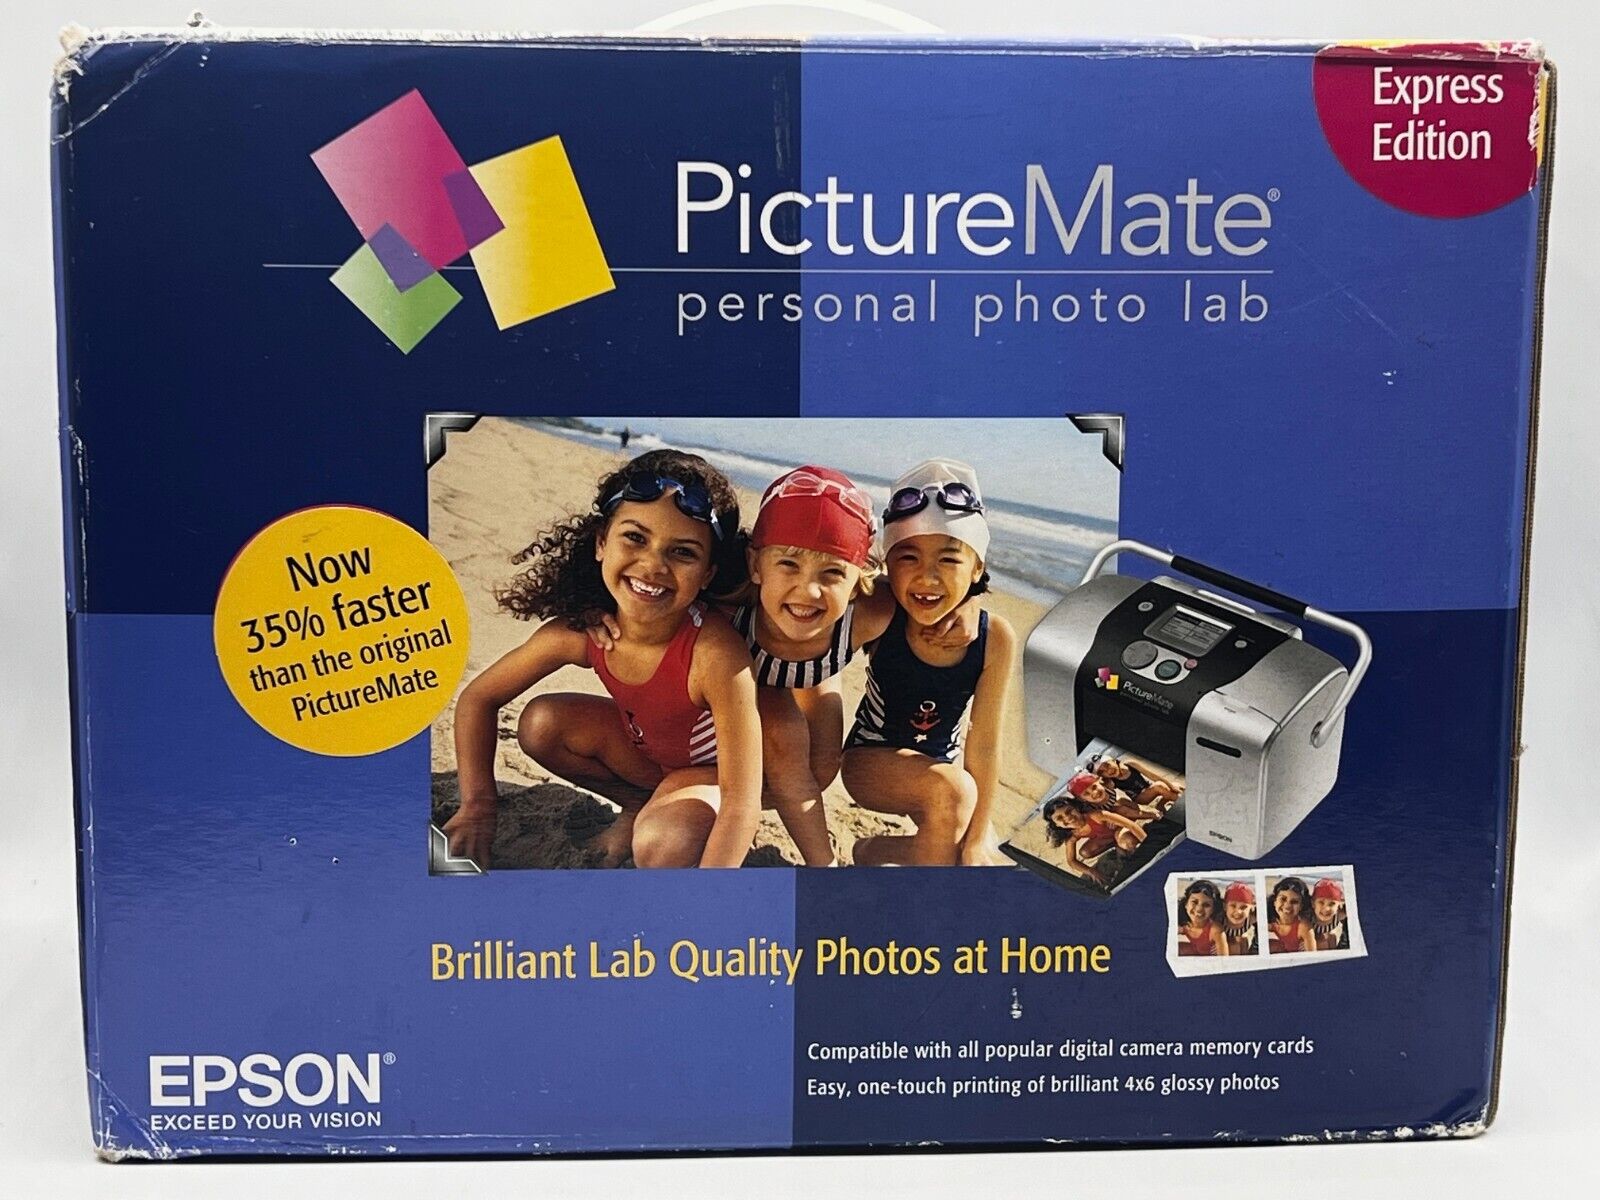 Epson Picture Mate Express Edition Personal Photo Lab Photo Printer, Model B271A